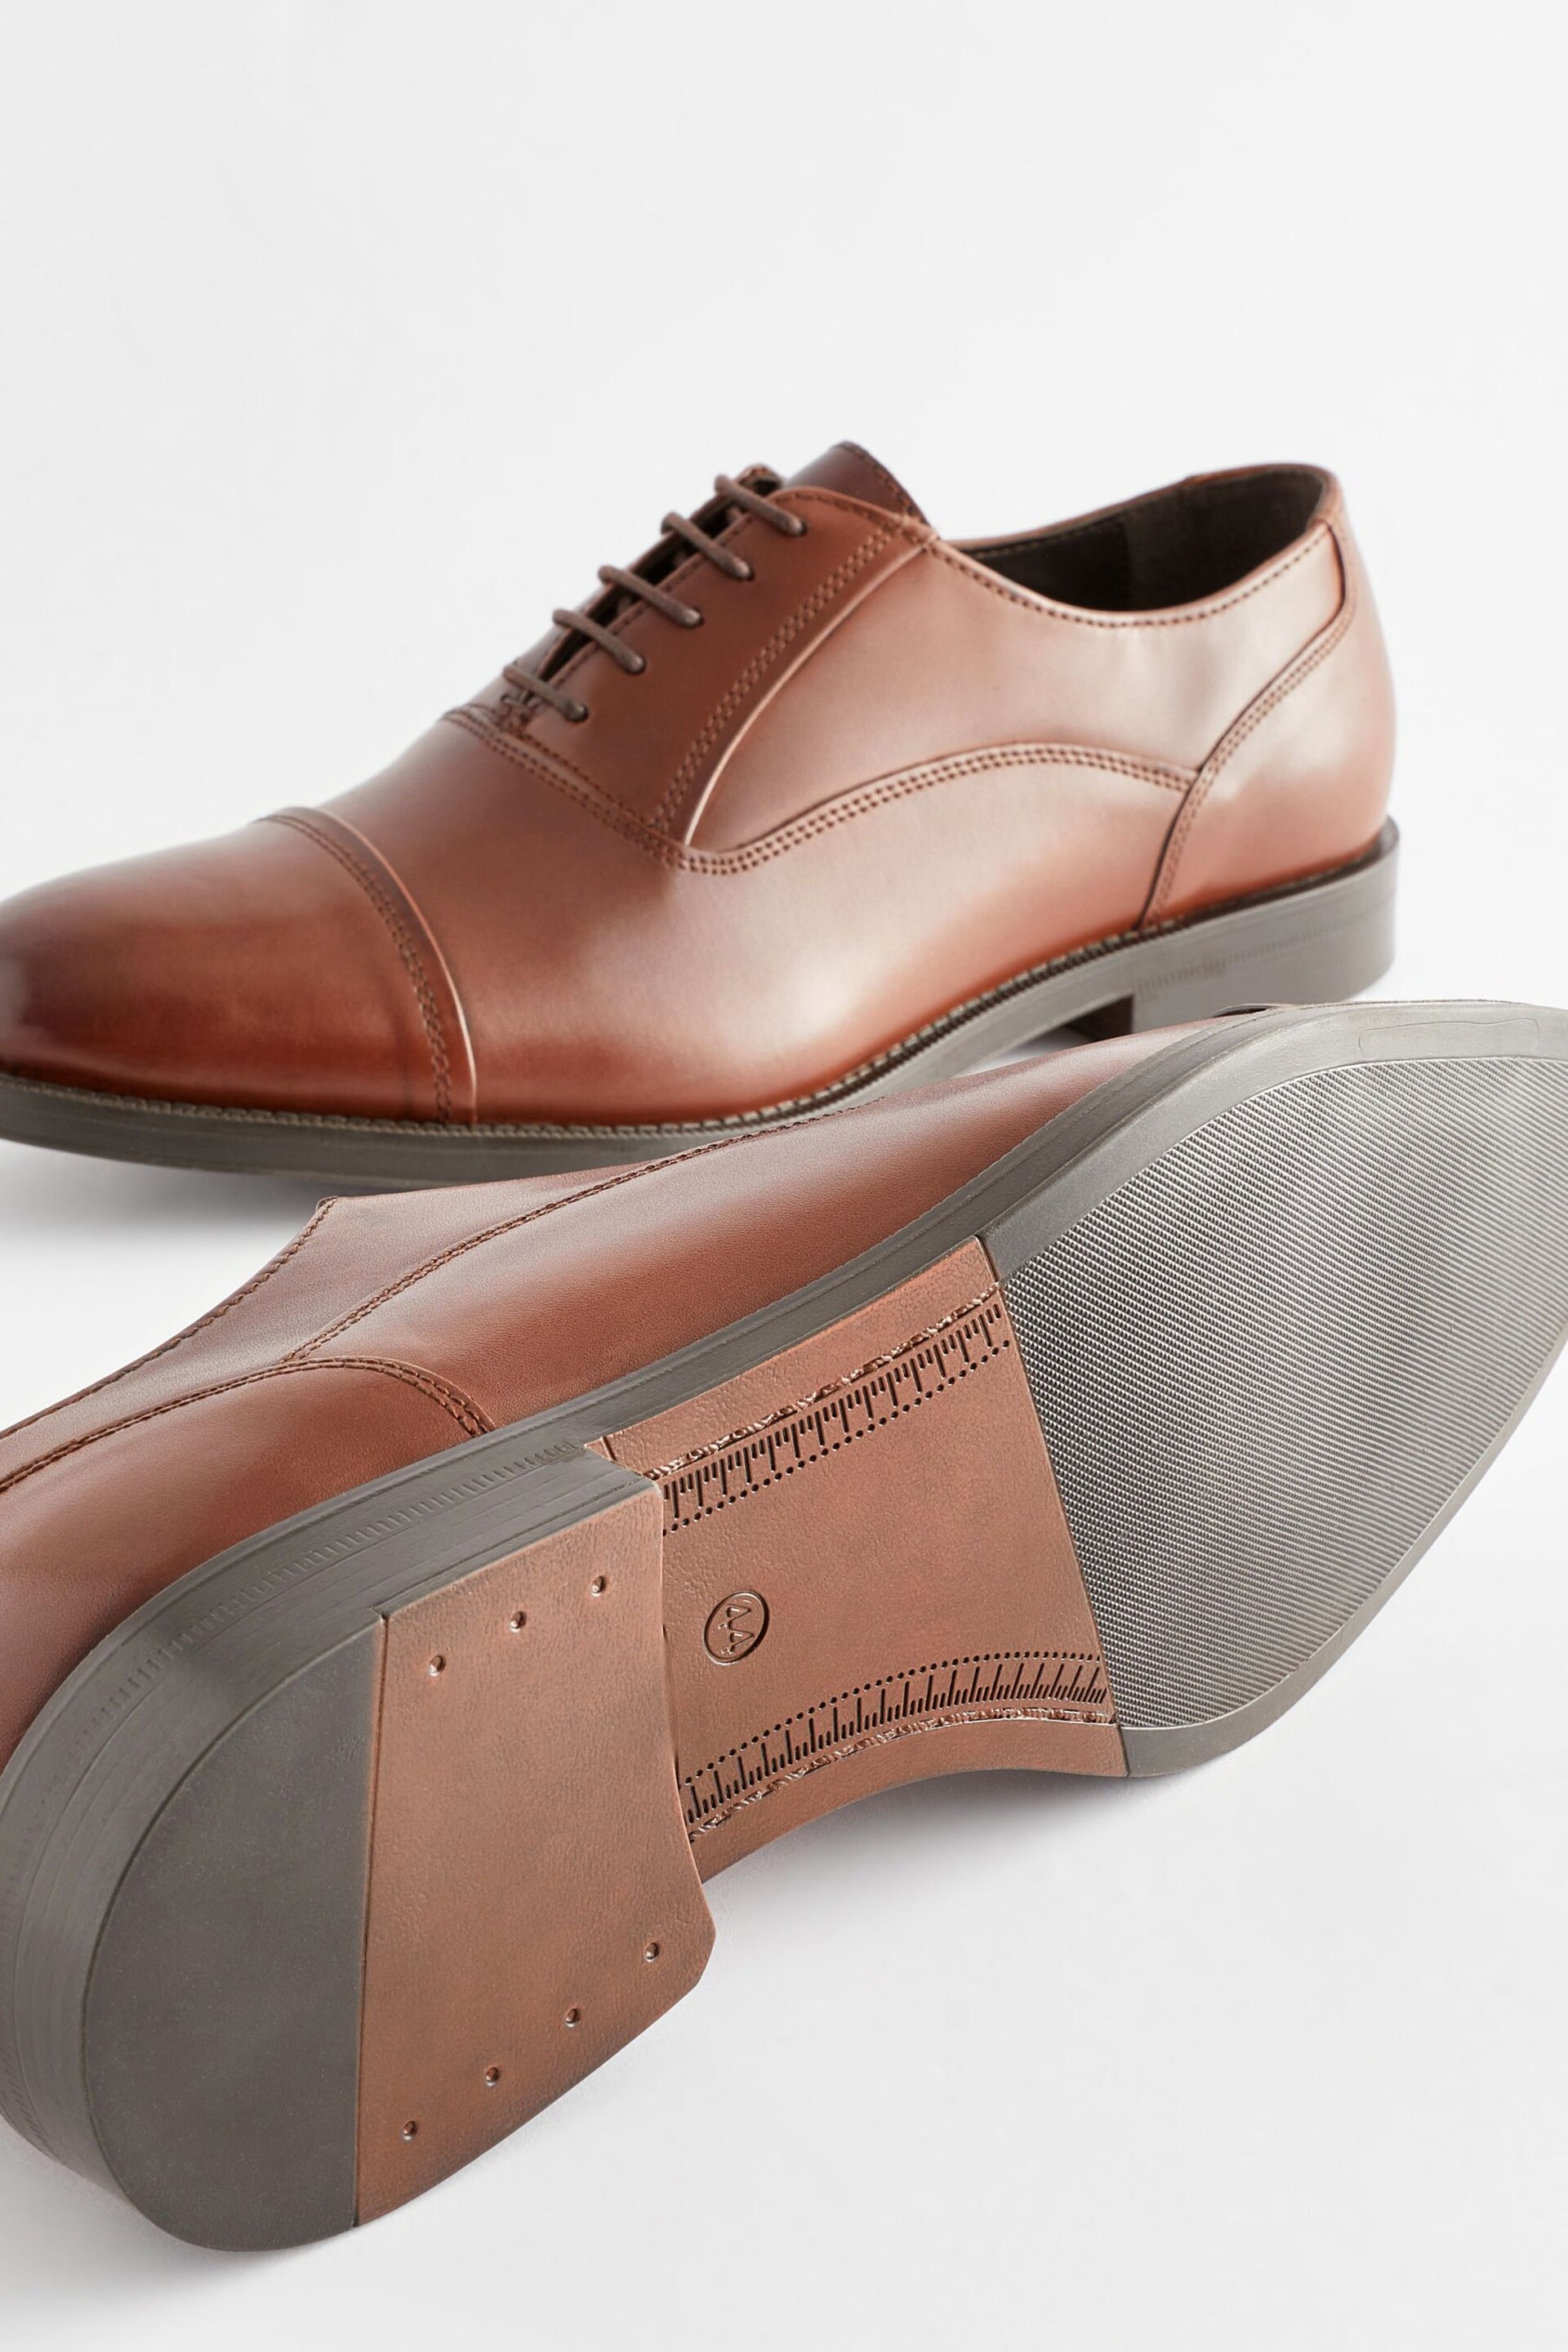 Brown Leather Oxford Toecap Shoes - Image 4 of 6